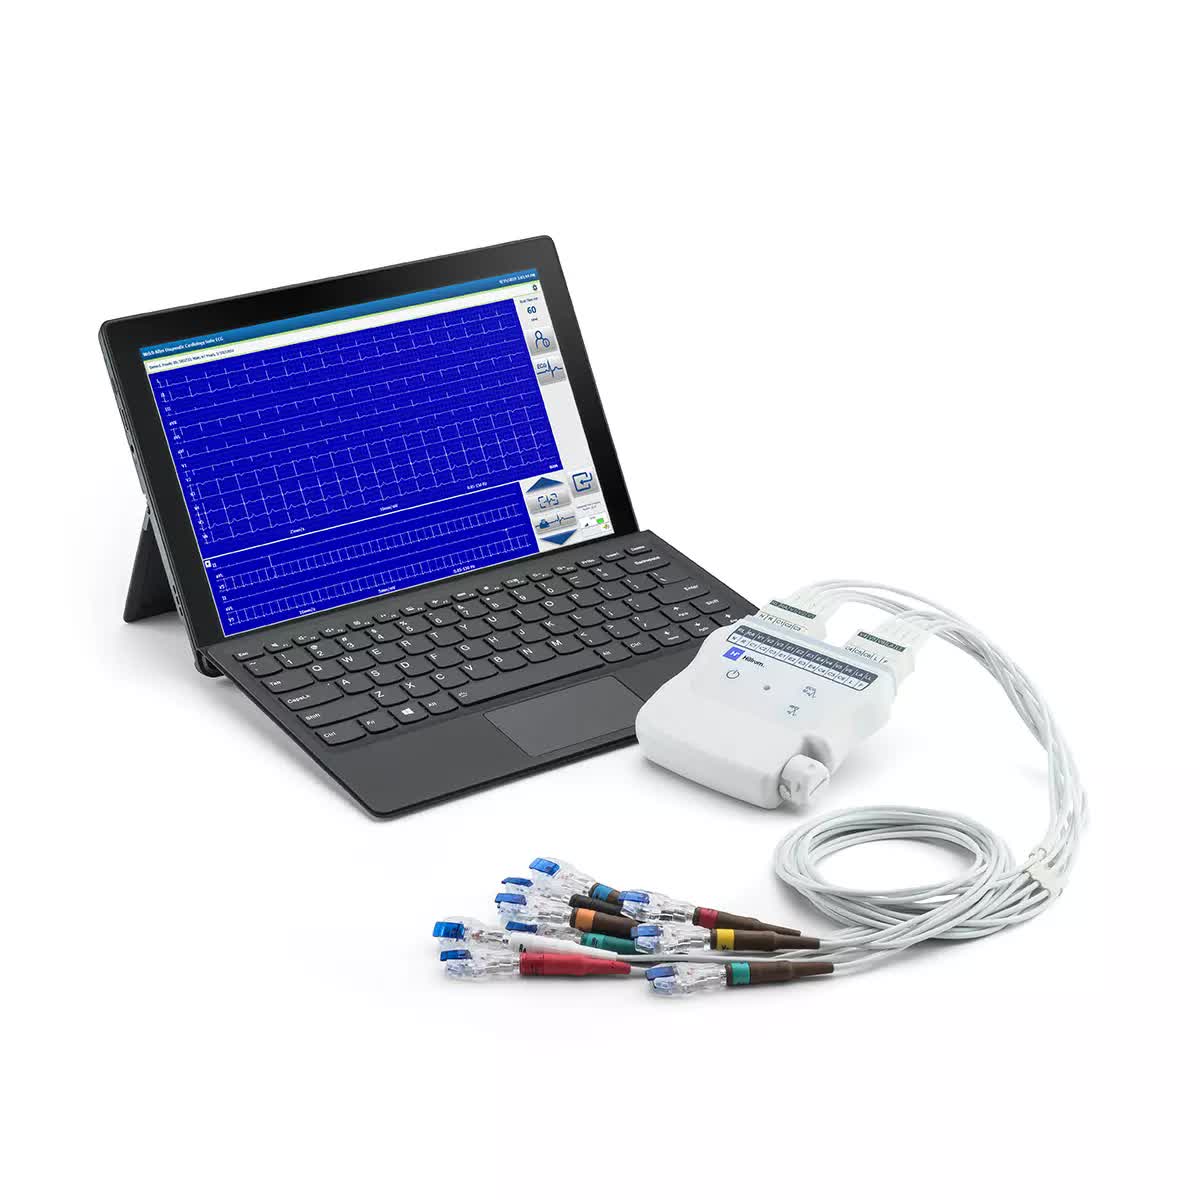 Welch Allyn Connex Diagnostic Cardiology Suite ECG Software with Cardio Wireless Acquisition Module and DICOM Connectivity